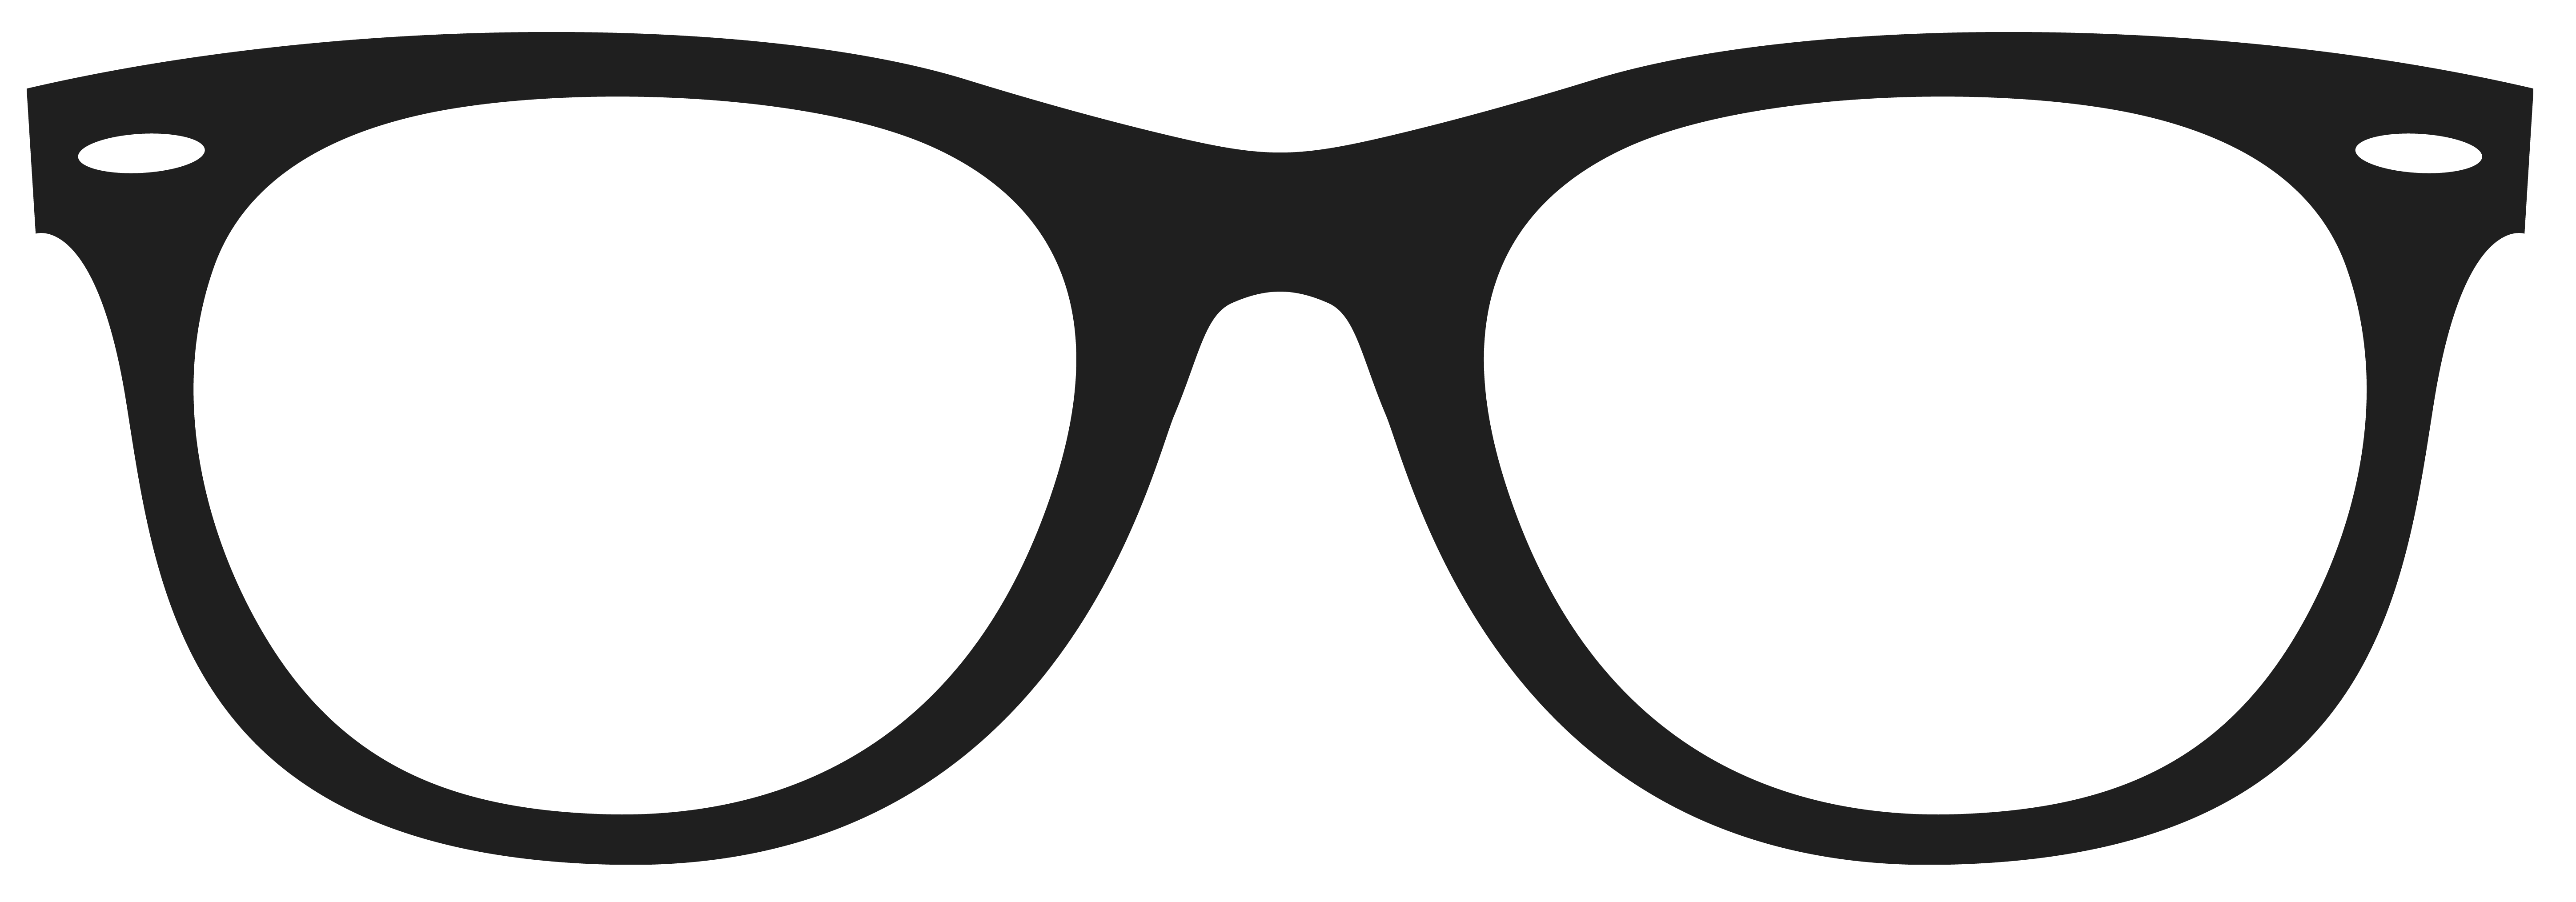 Movember_Glasses_PNG_Clipart_Image